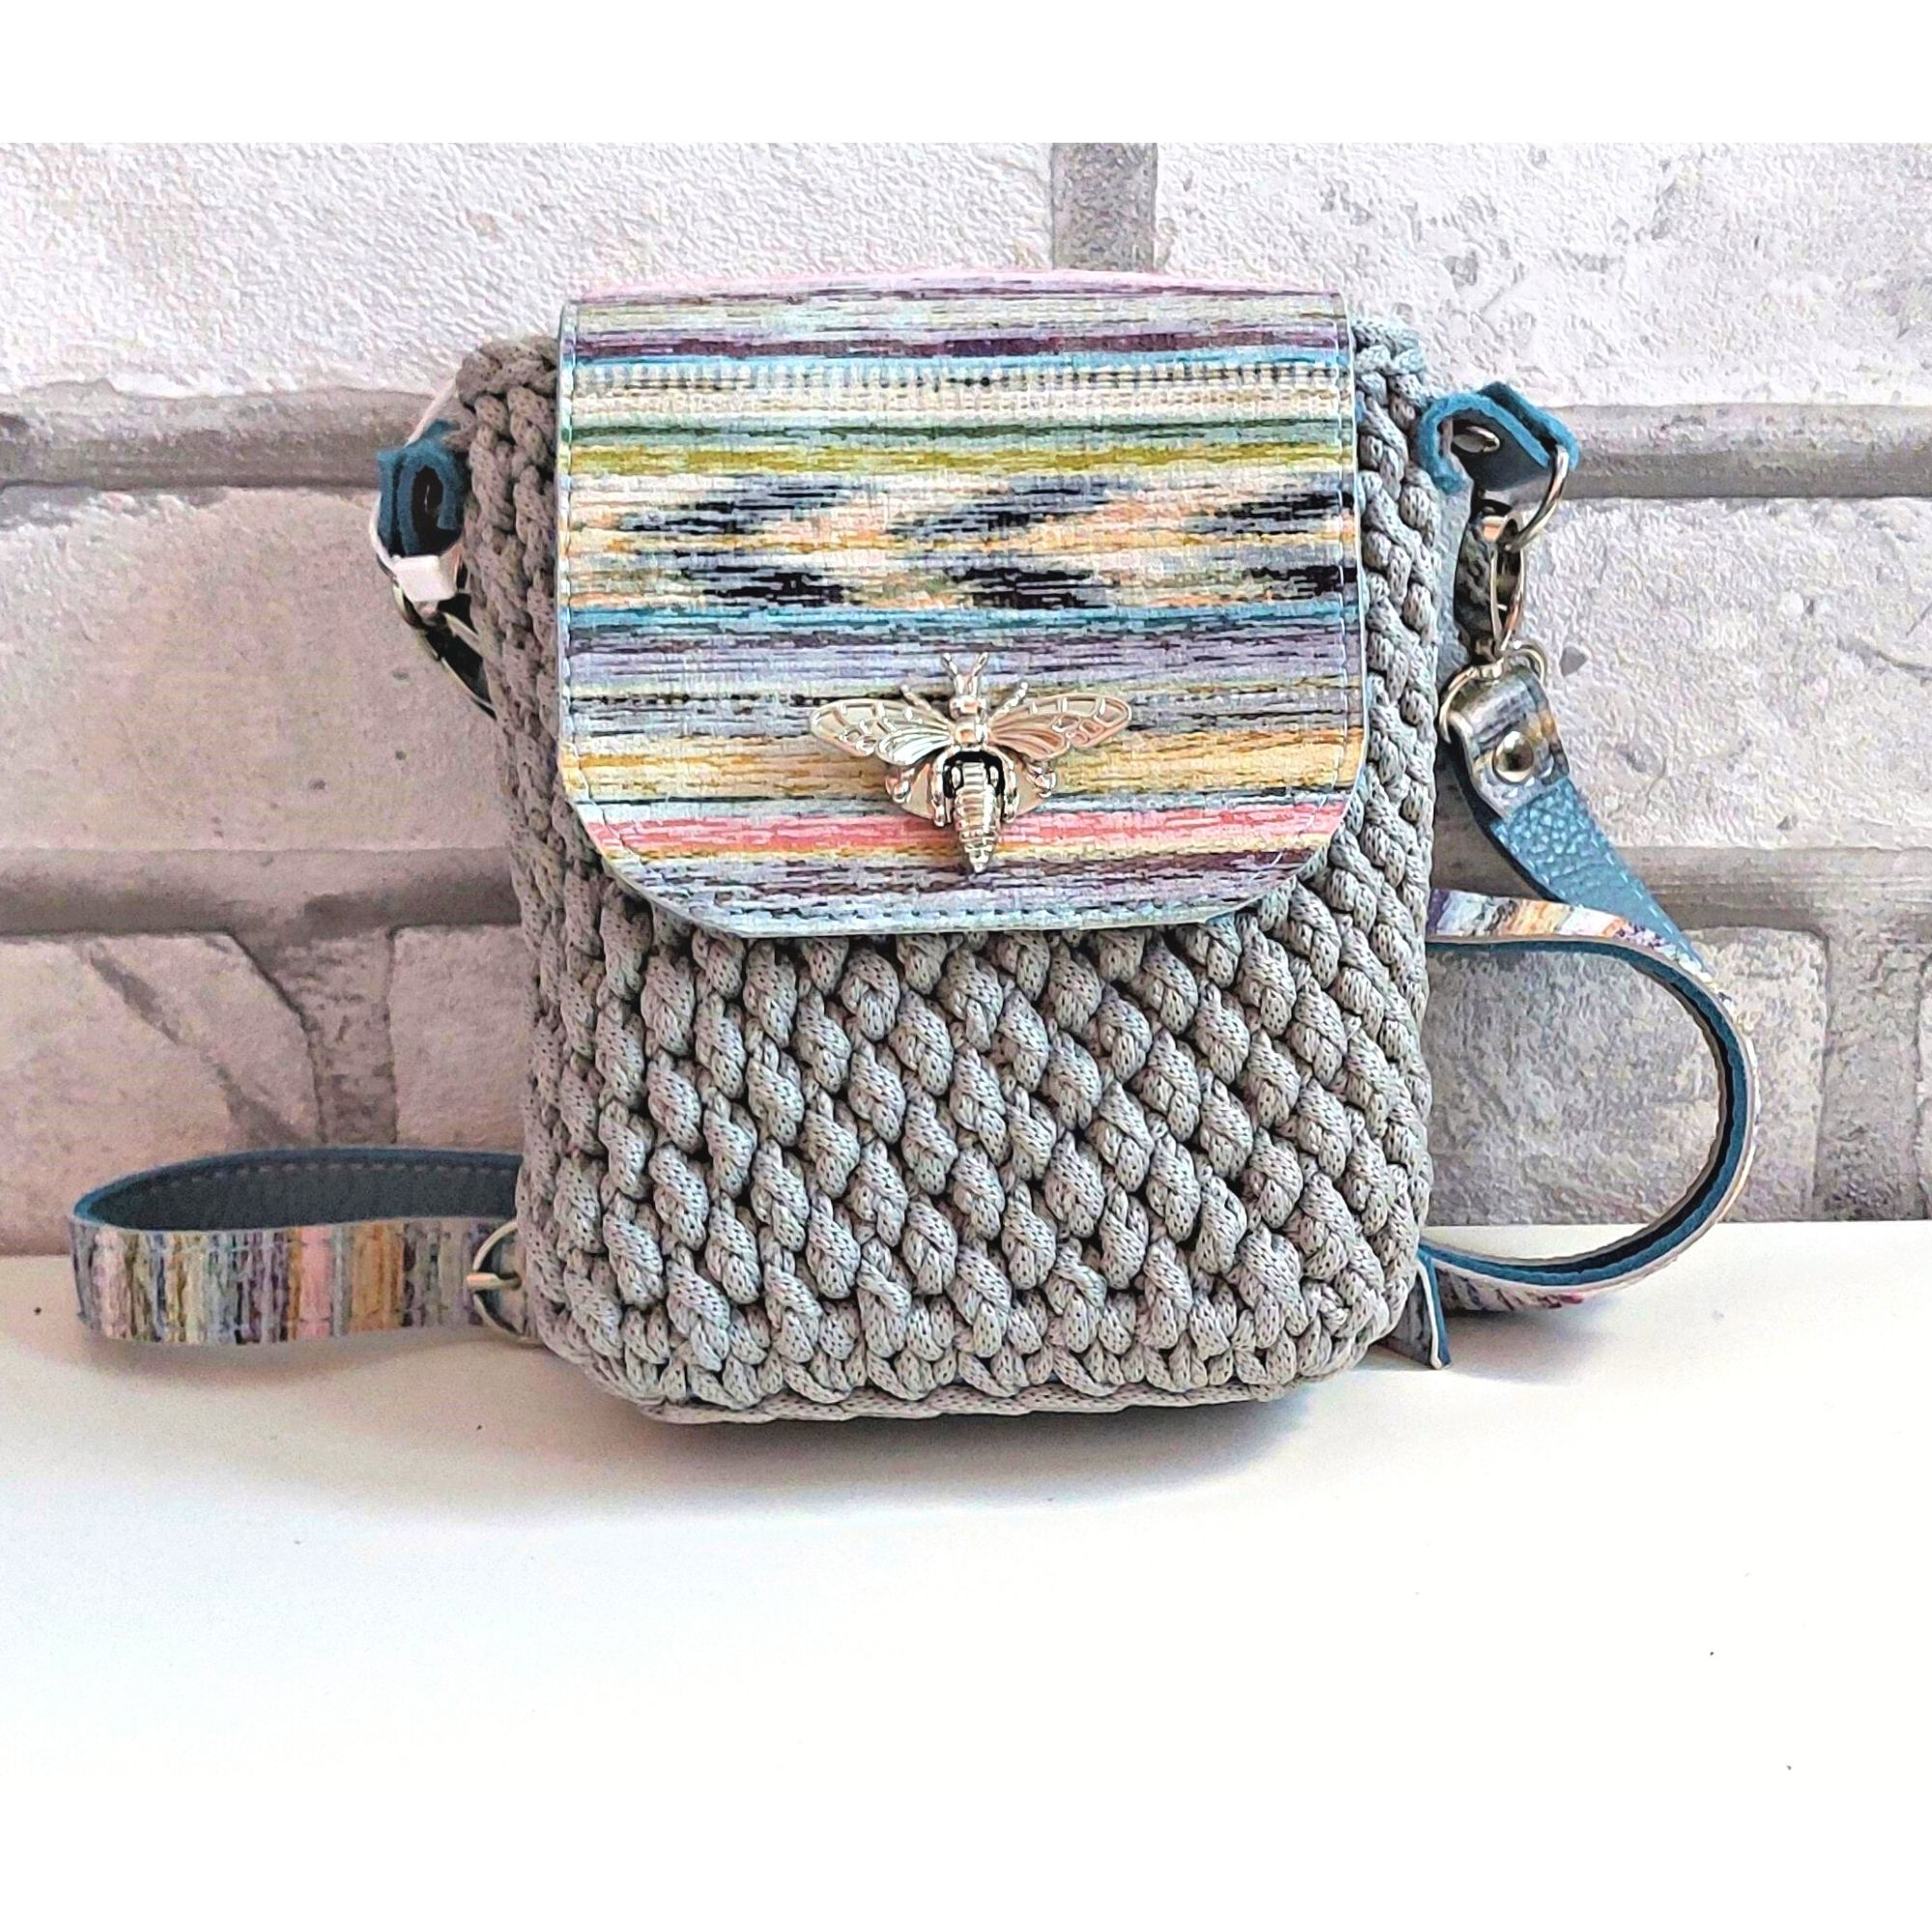 Celly Bags: Handbags Made Just to Fit Your Cell Phone